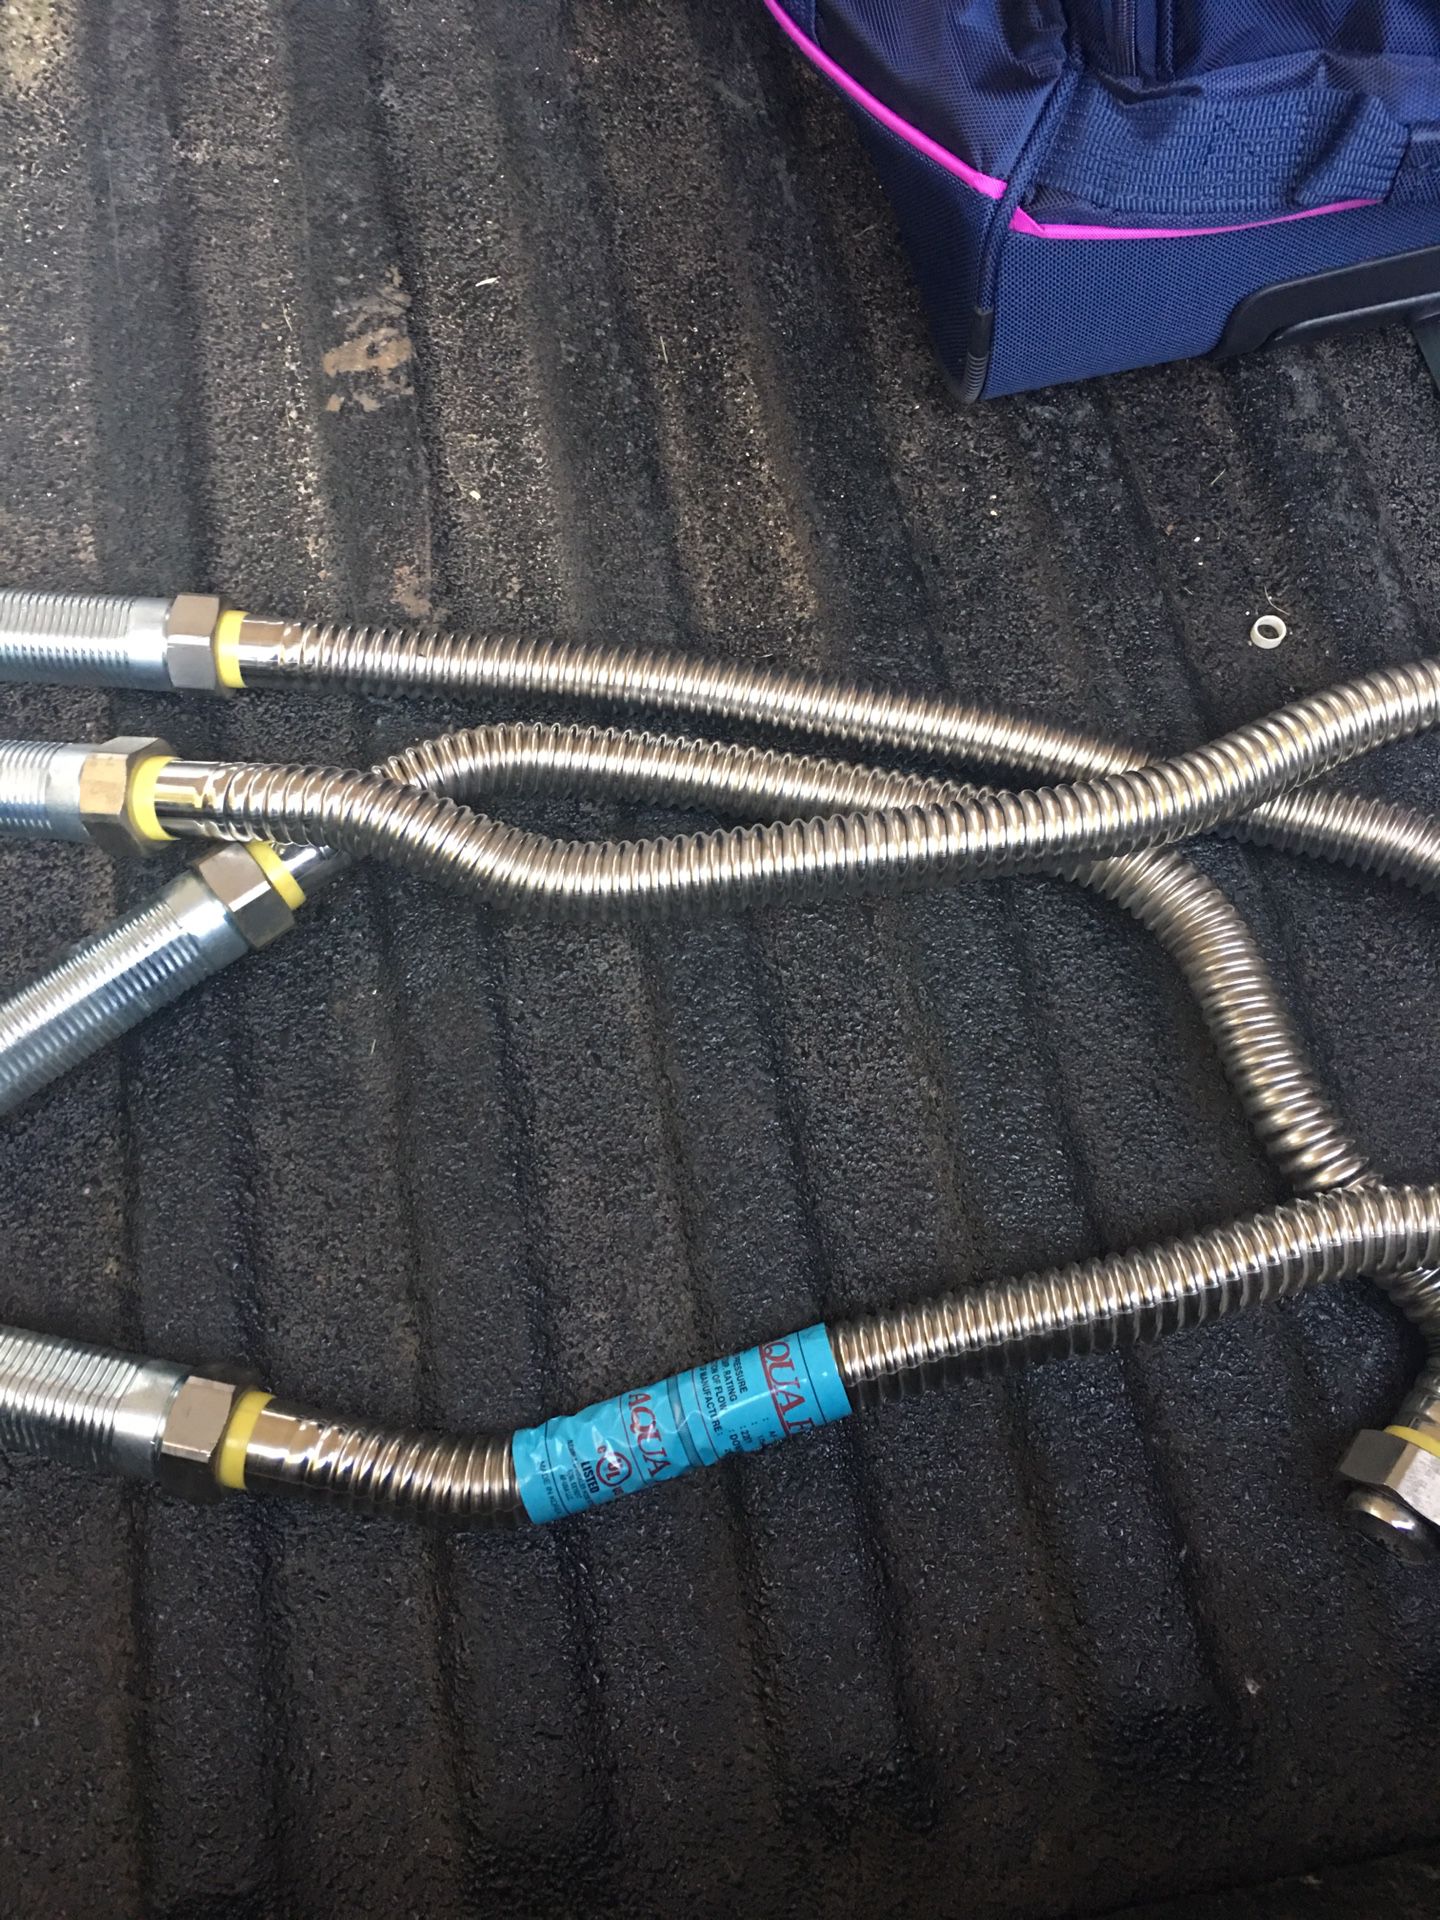 4 sprinkler heads with flex pipe